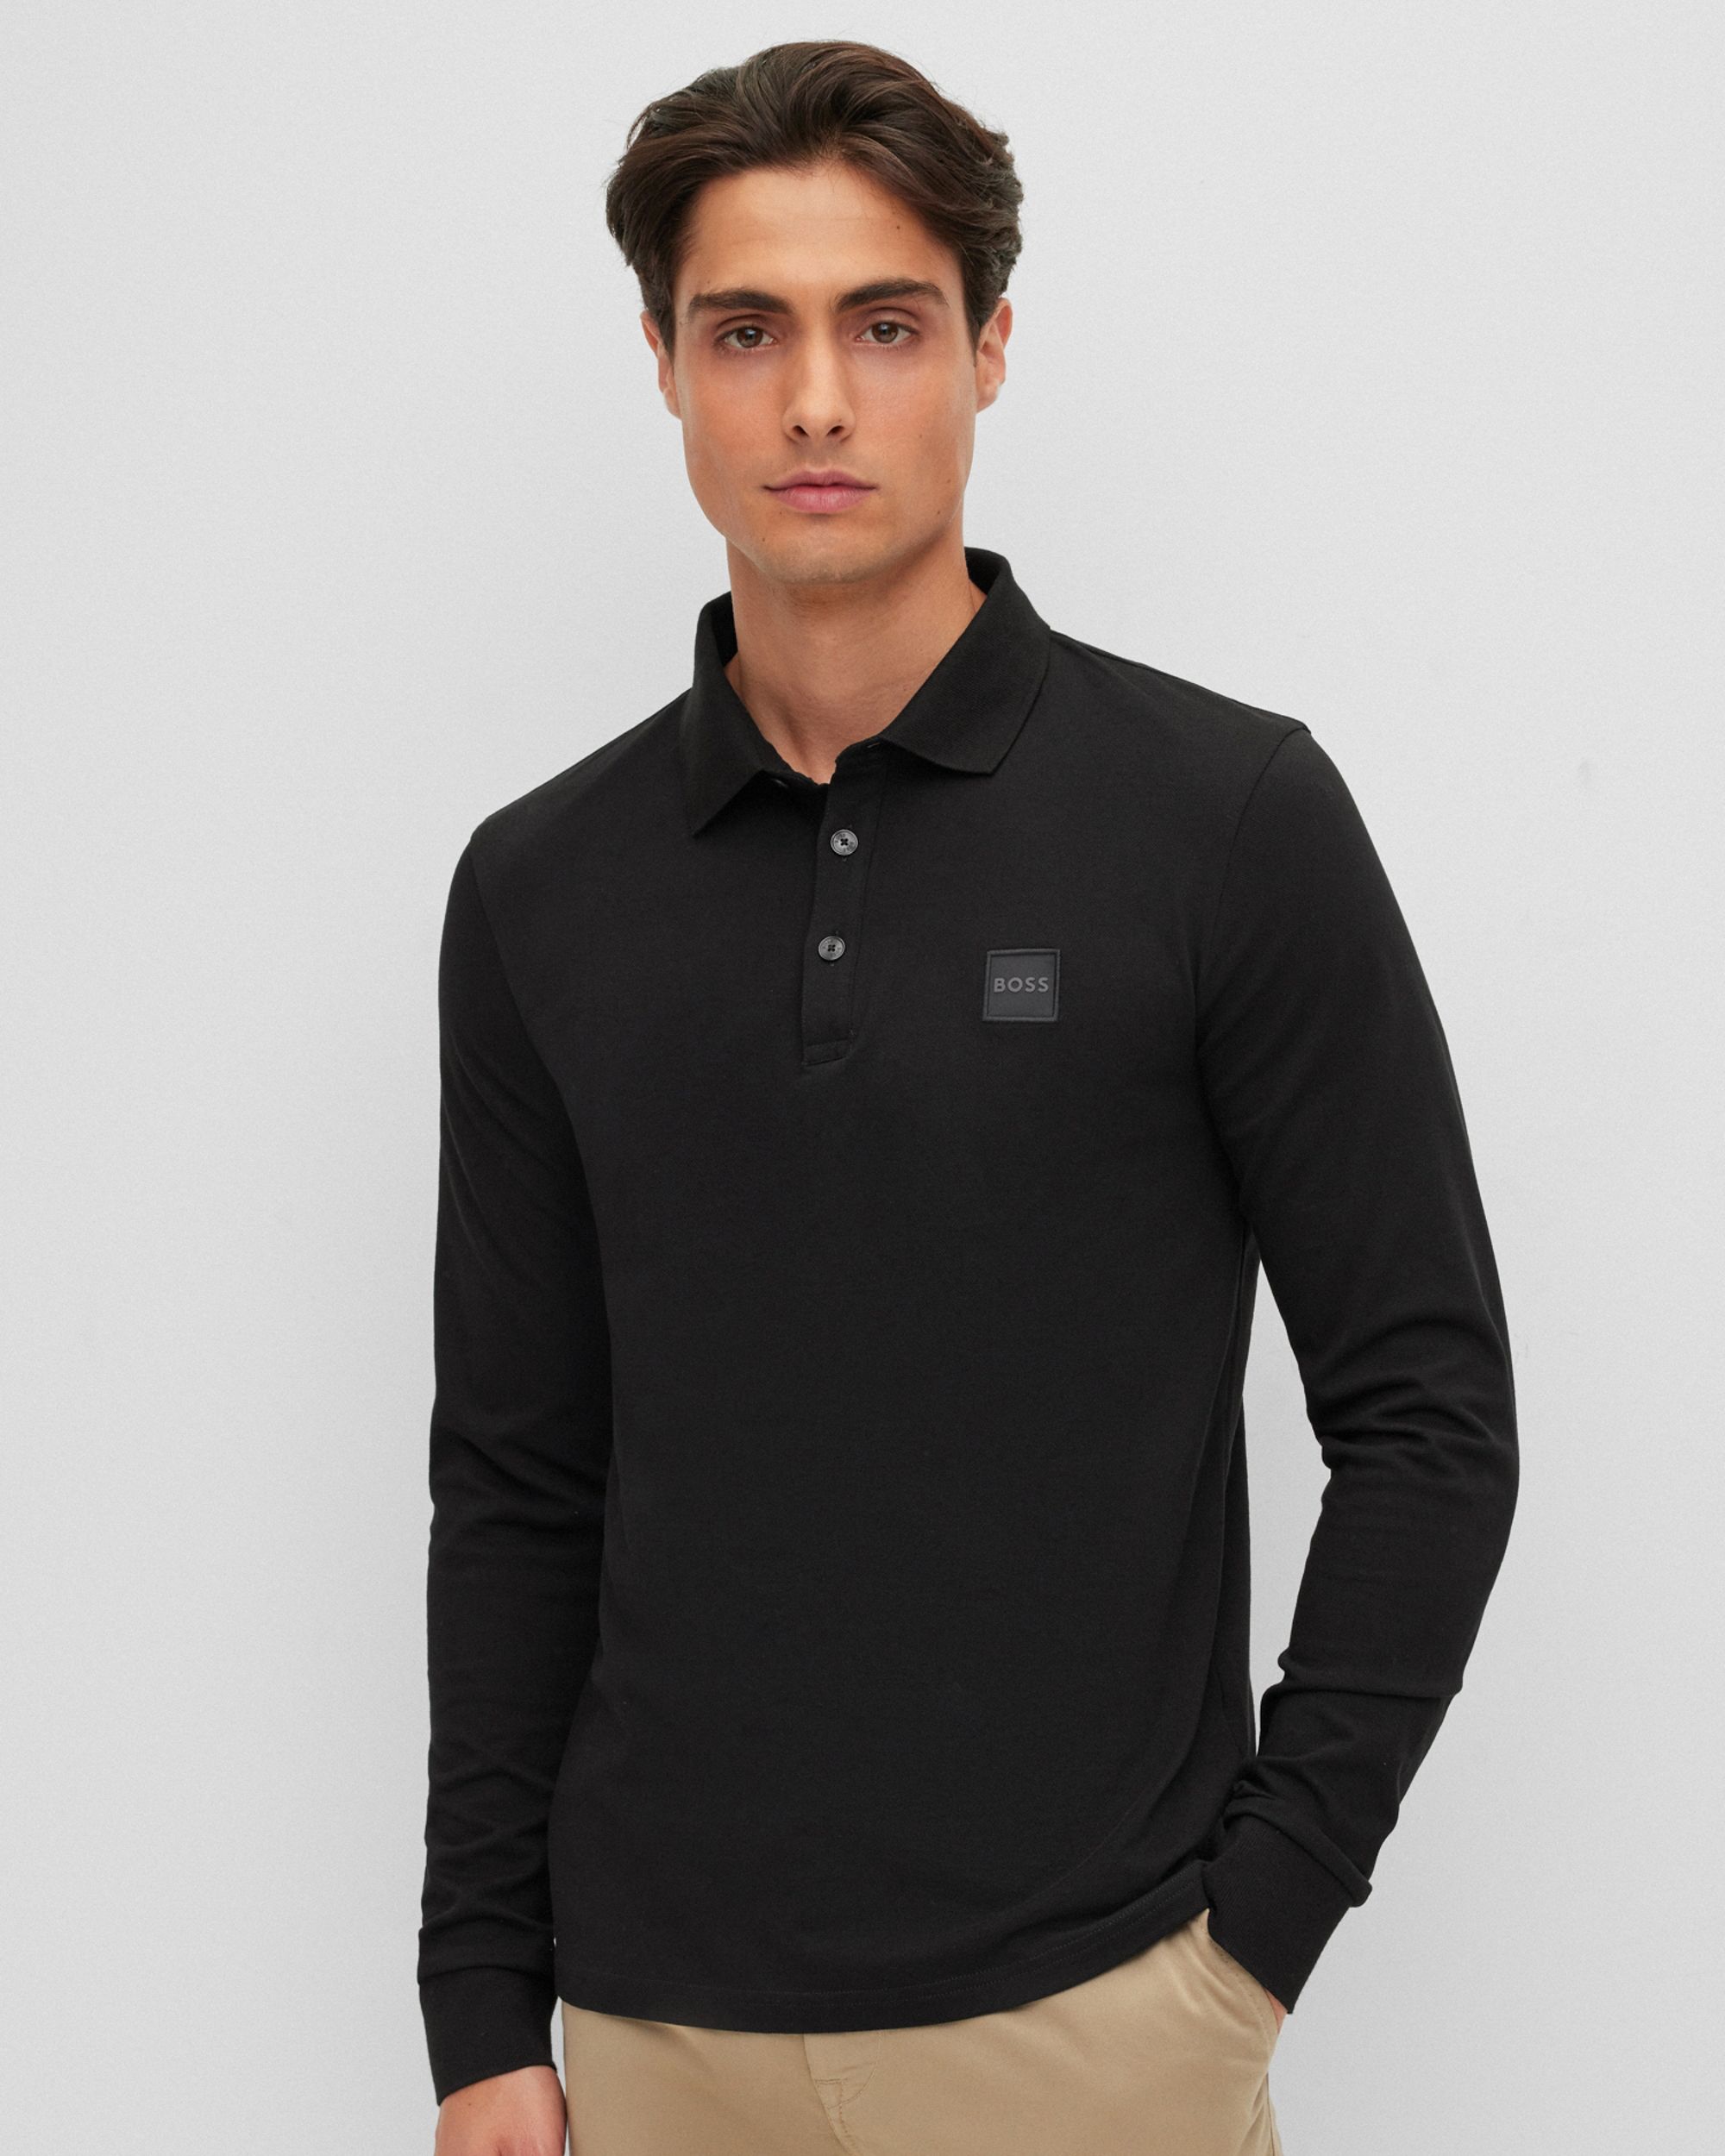 Hugo Boss Casual Passerby Polo LM Zwart 074040-001-L